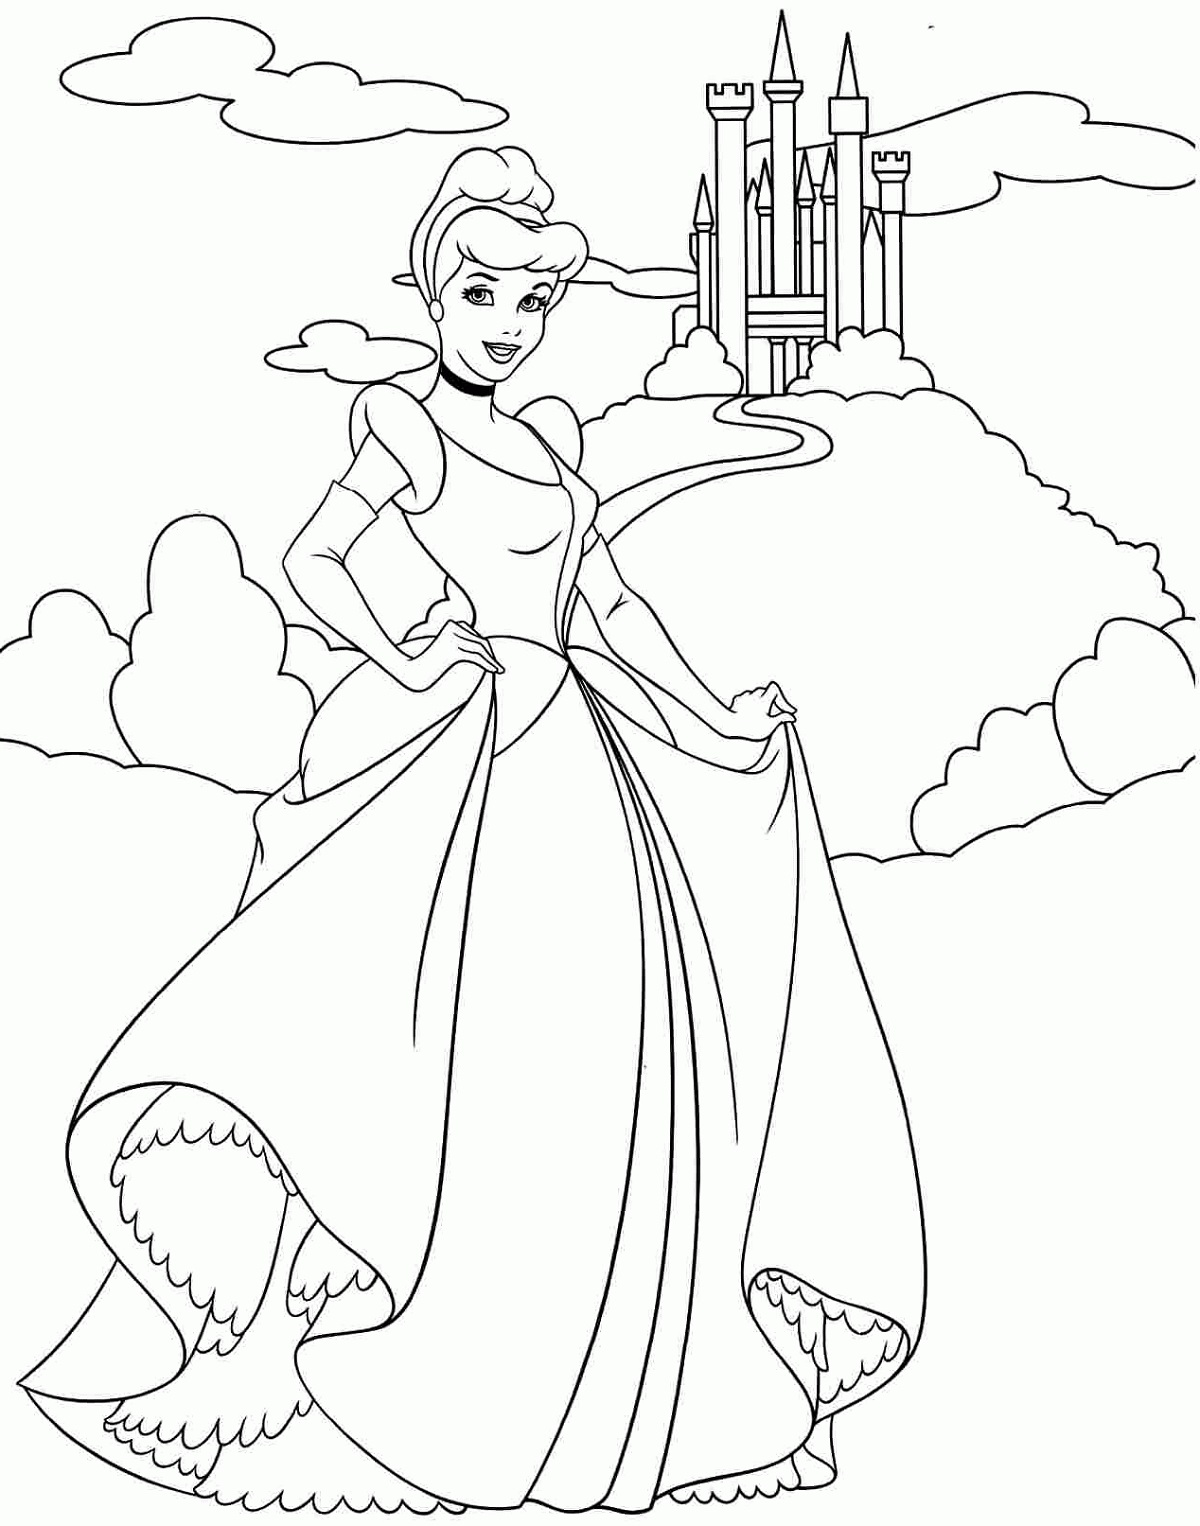 Download Beautiful Cinderella Coloring Pages | 101 Coloring